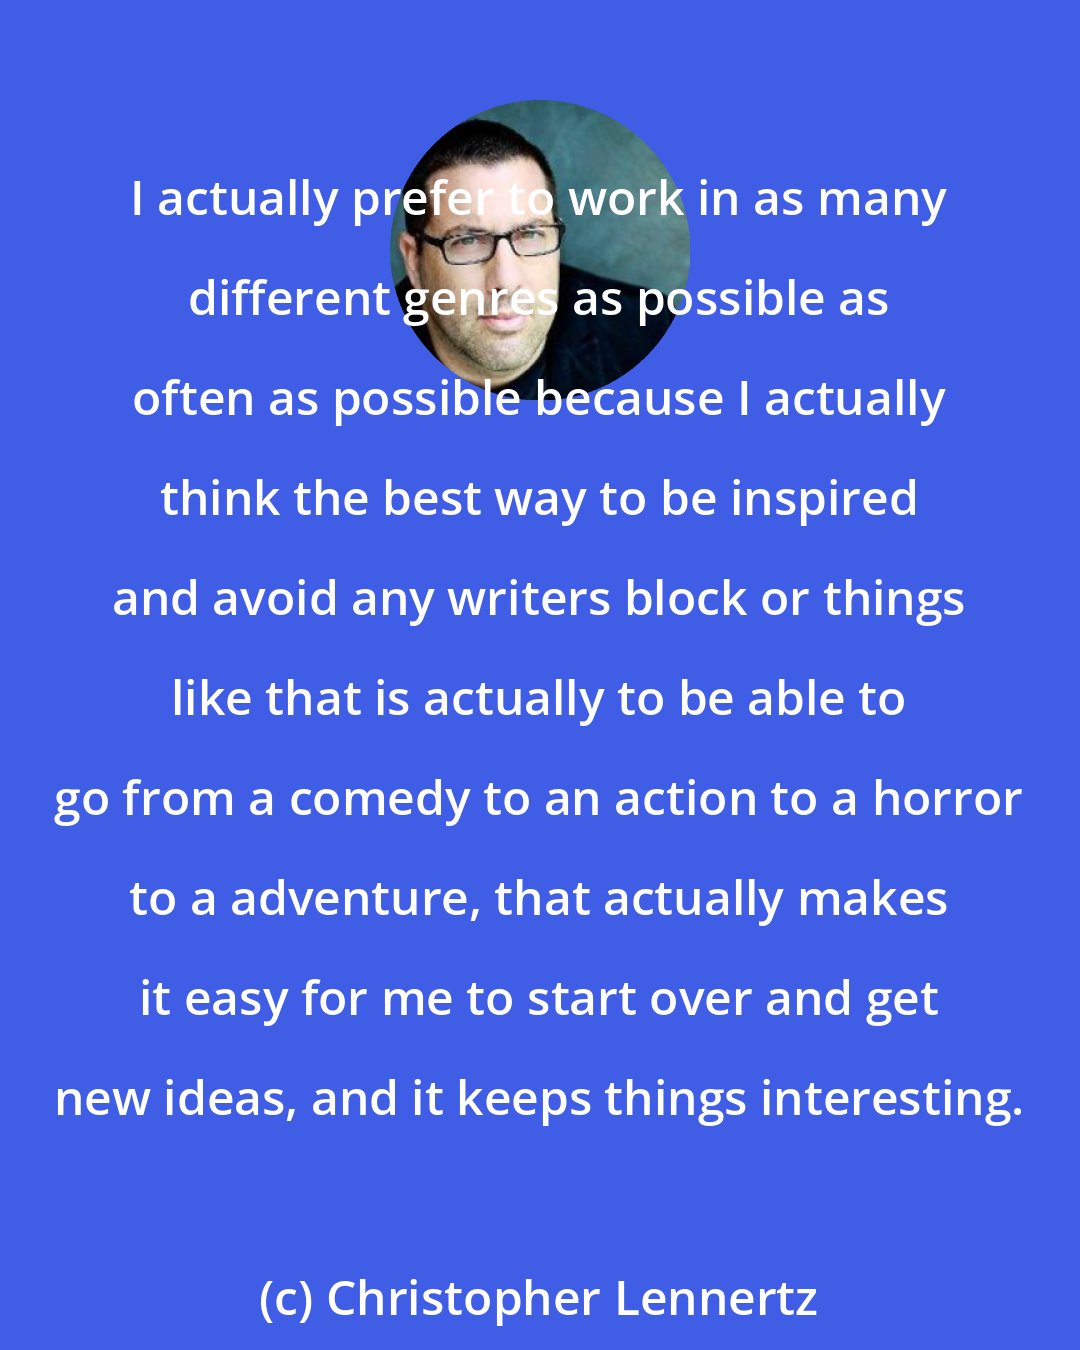 Christopher Lennertz: I actually prefer to work in as many different genres as possible as often as possible because I actually think the best way to be inspired and avoid any writers block or things like that is actually to be able to go from a comedy to an action to a horror to a adventure, that actually makes it easy for me to start over and get new ideas, and it keeps things interesting.